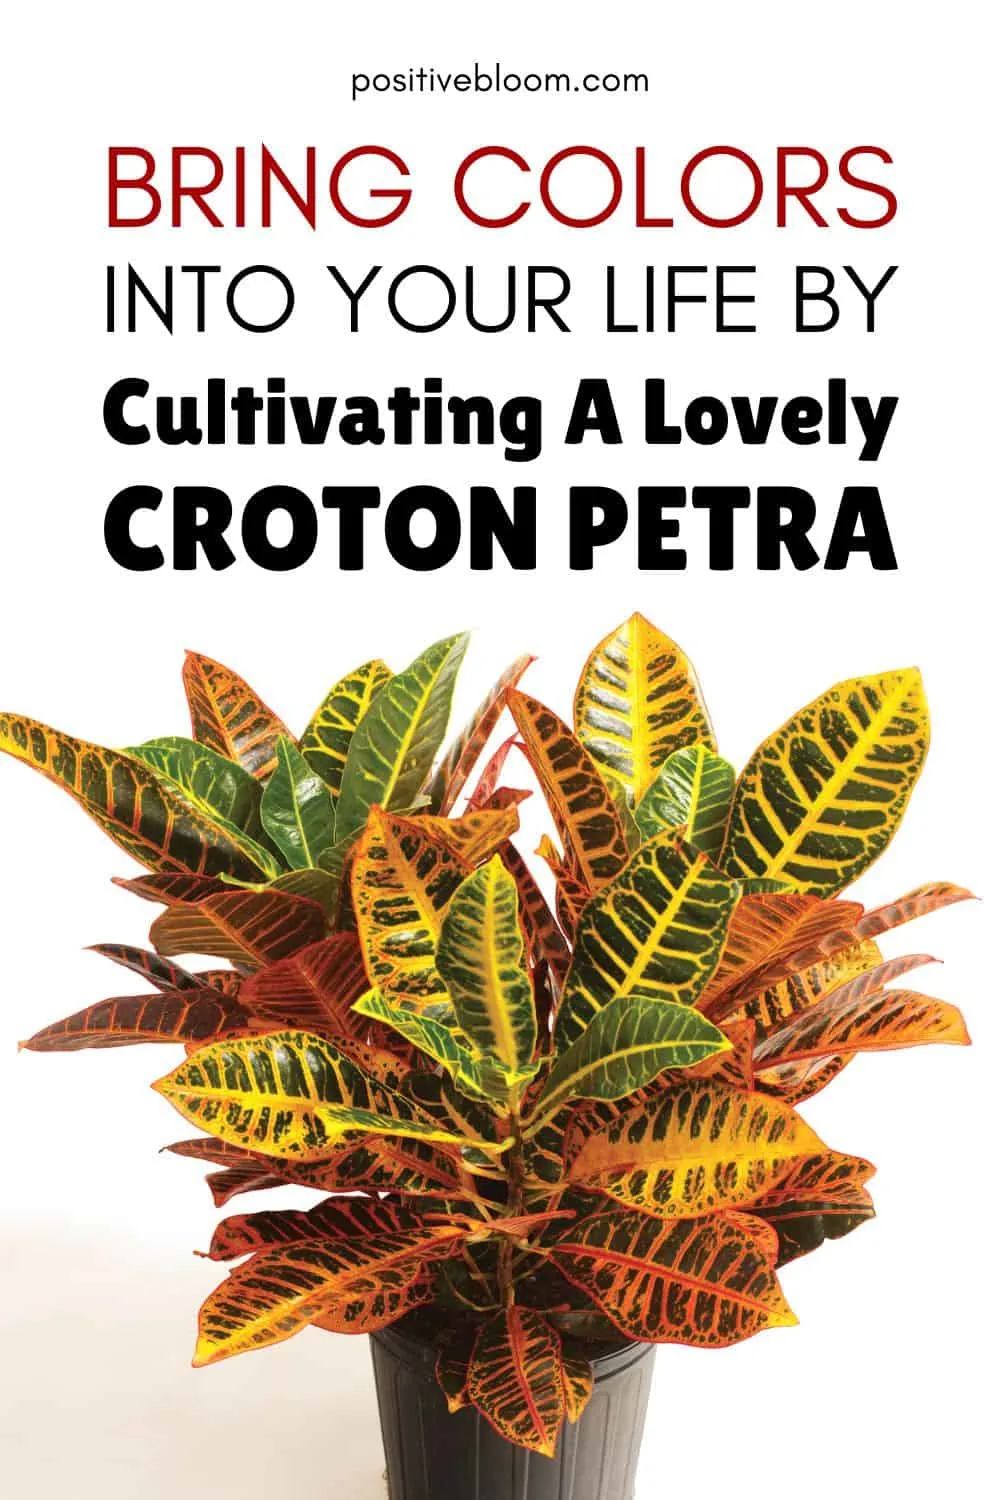 Bring Colors Into Your Life By Cultivating A Lovely Croton Petra Pinterest